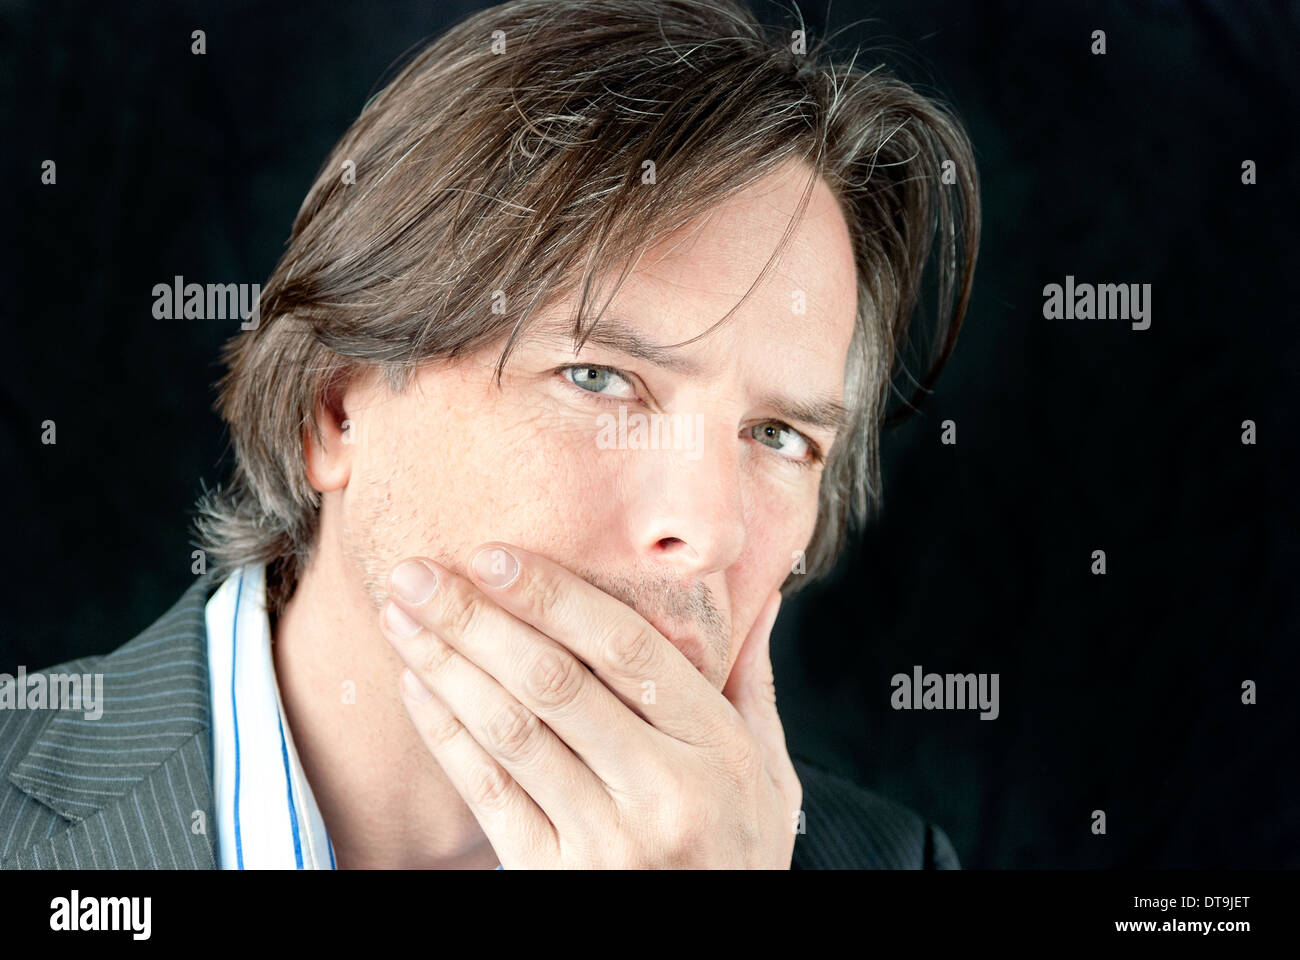 Close-up of a ill businessman covering his mouth. Stock Photo